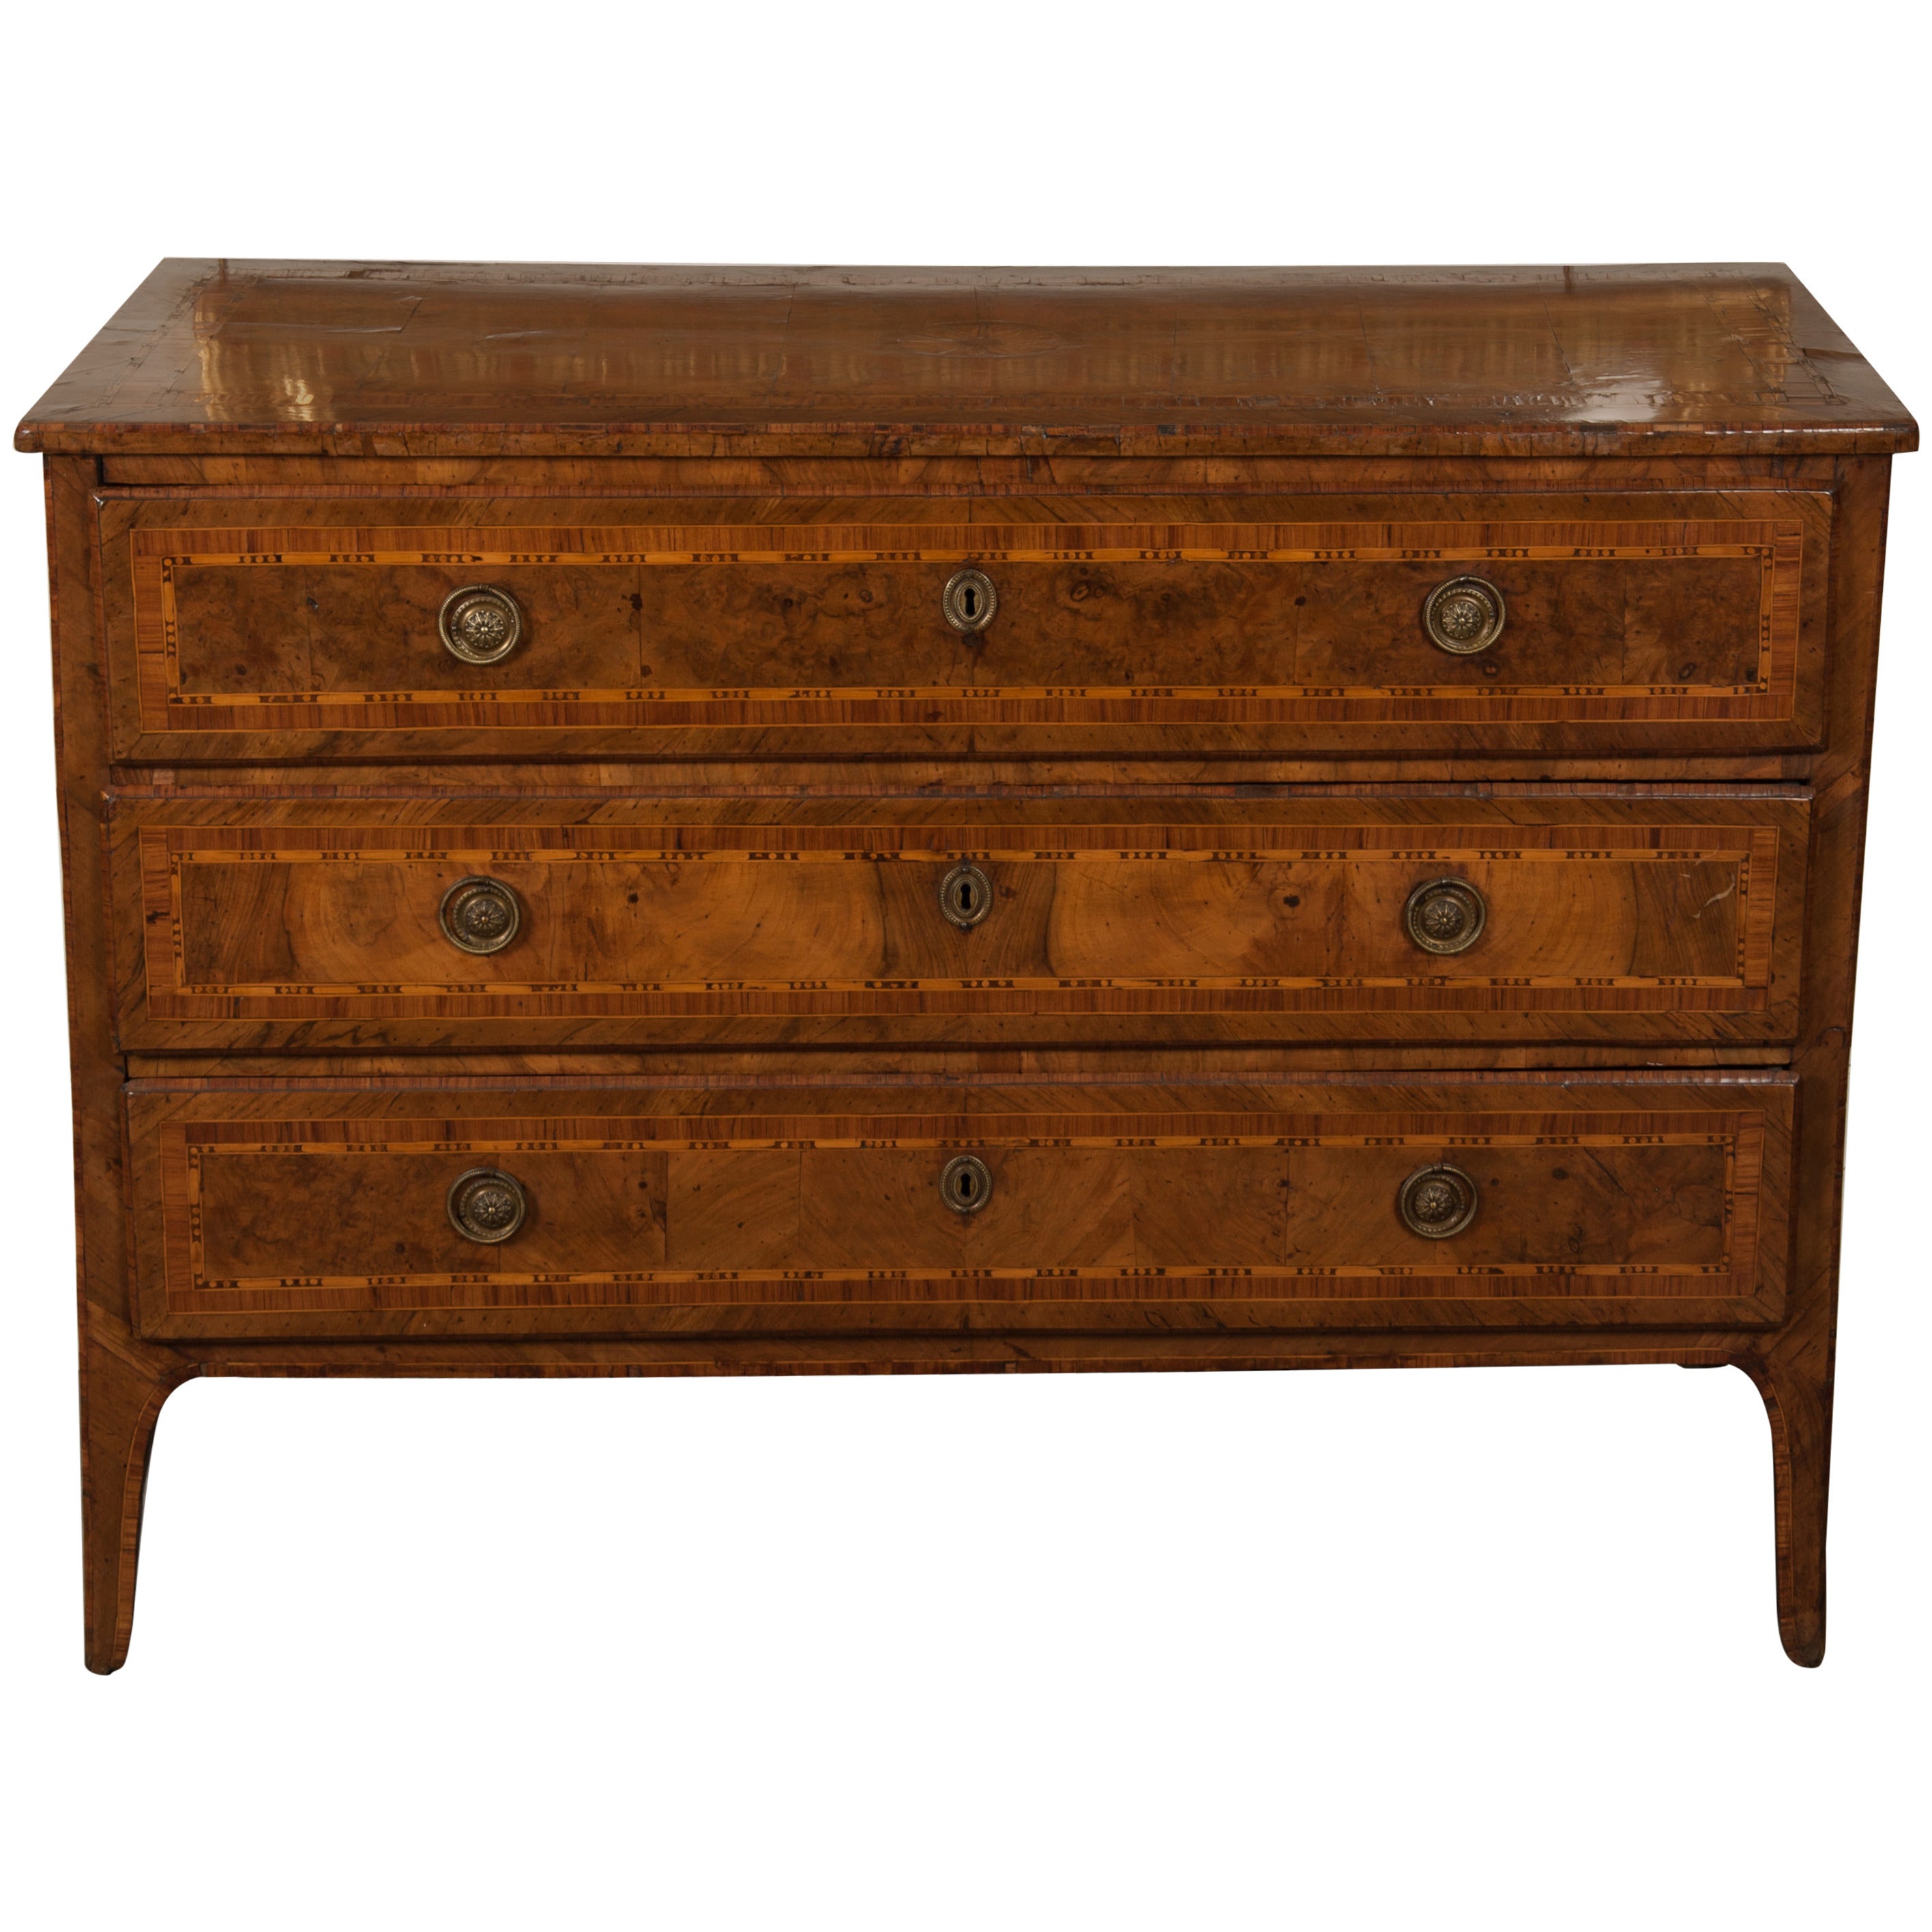 Late 18th Century Italian Marquetry Commode For Sale